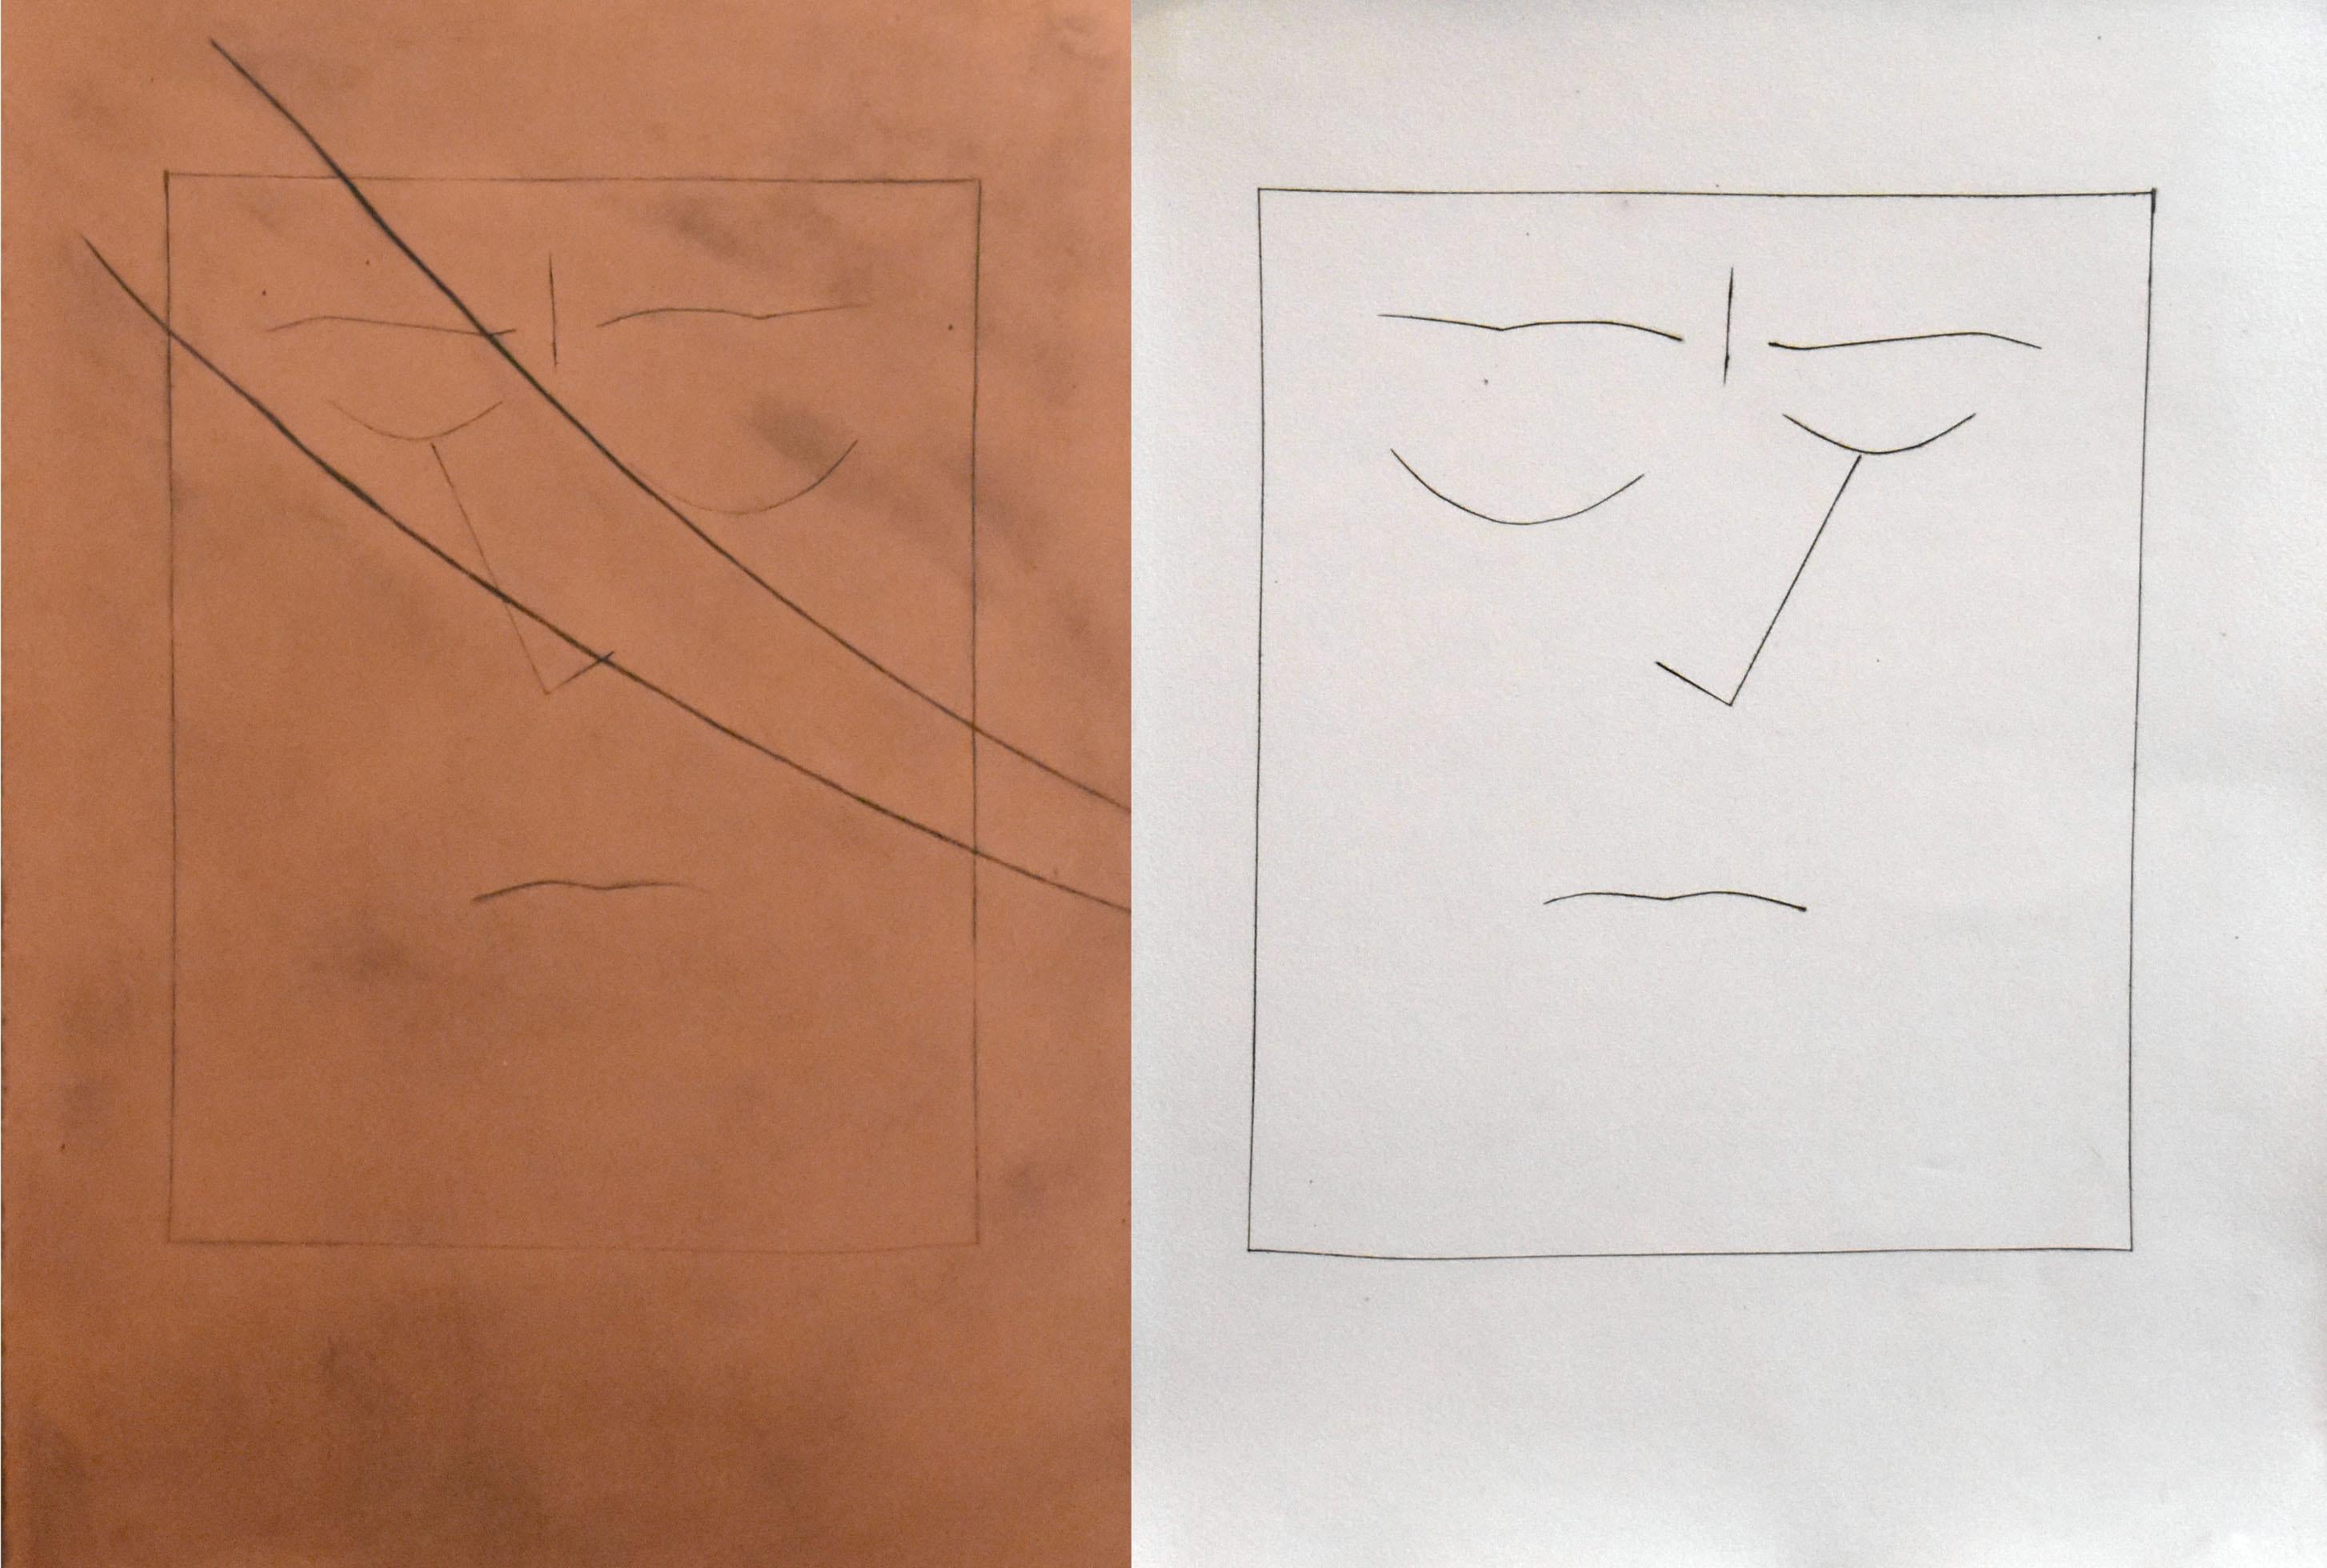 Pablo Picasso Figurative Sculpture - Square Head of a Man with Closed Eyes (Plate VIII)